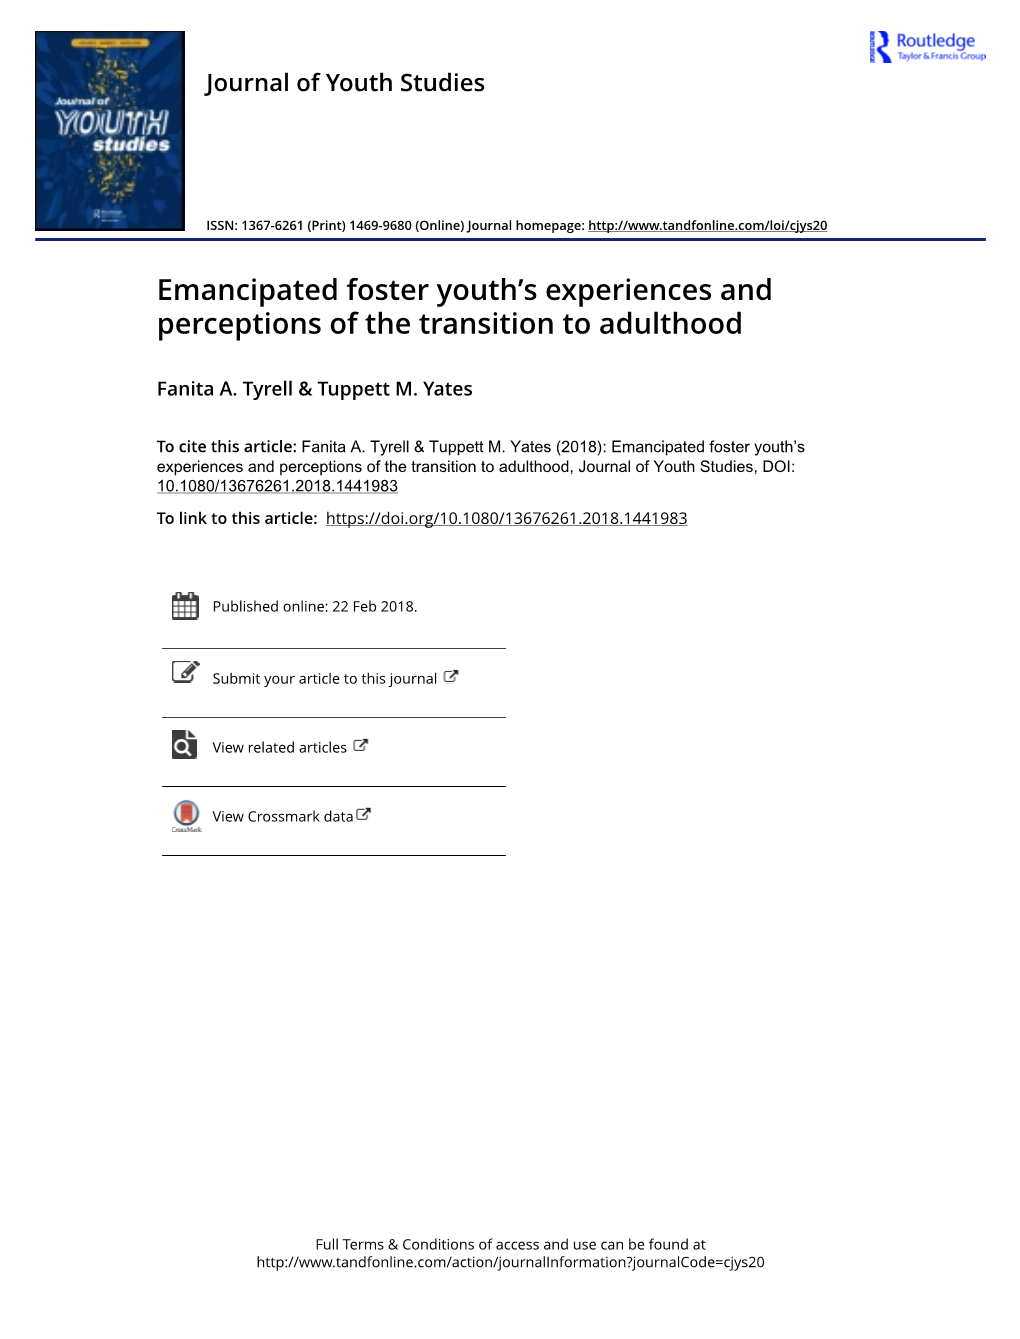 Emancipated Foster Youth's Experiences and Perceptions of The